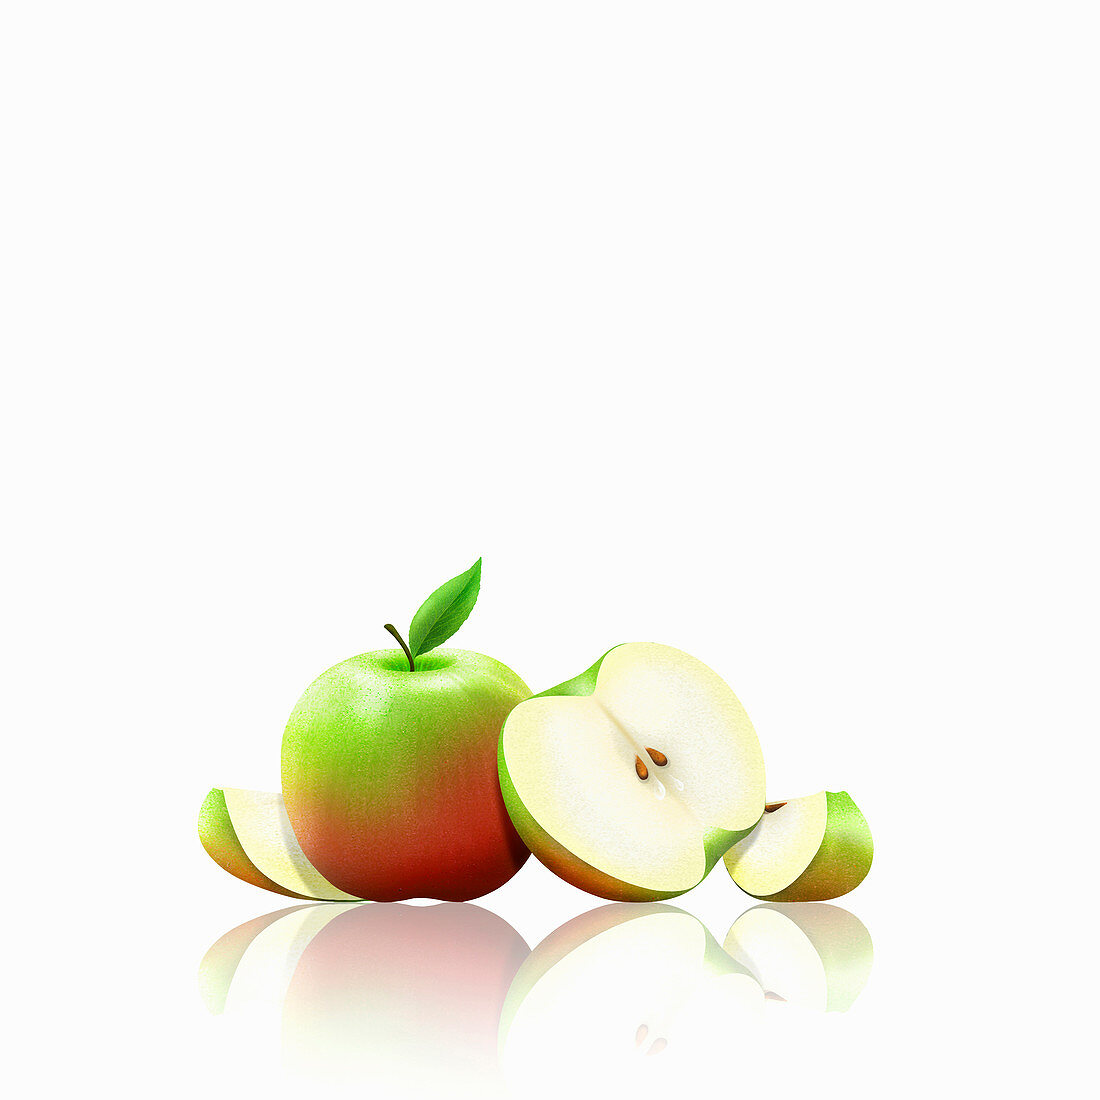 Fresh apples, whole, halved and slices, illustration